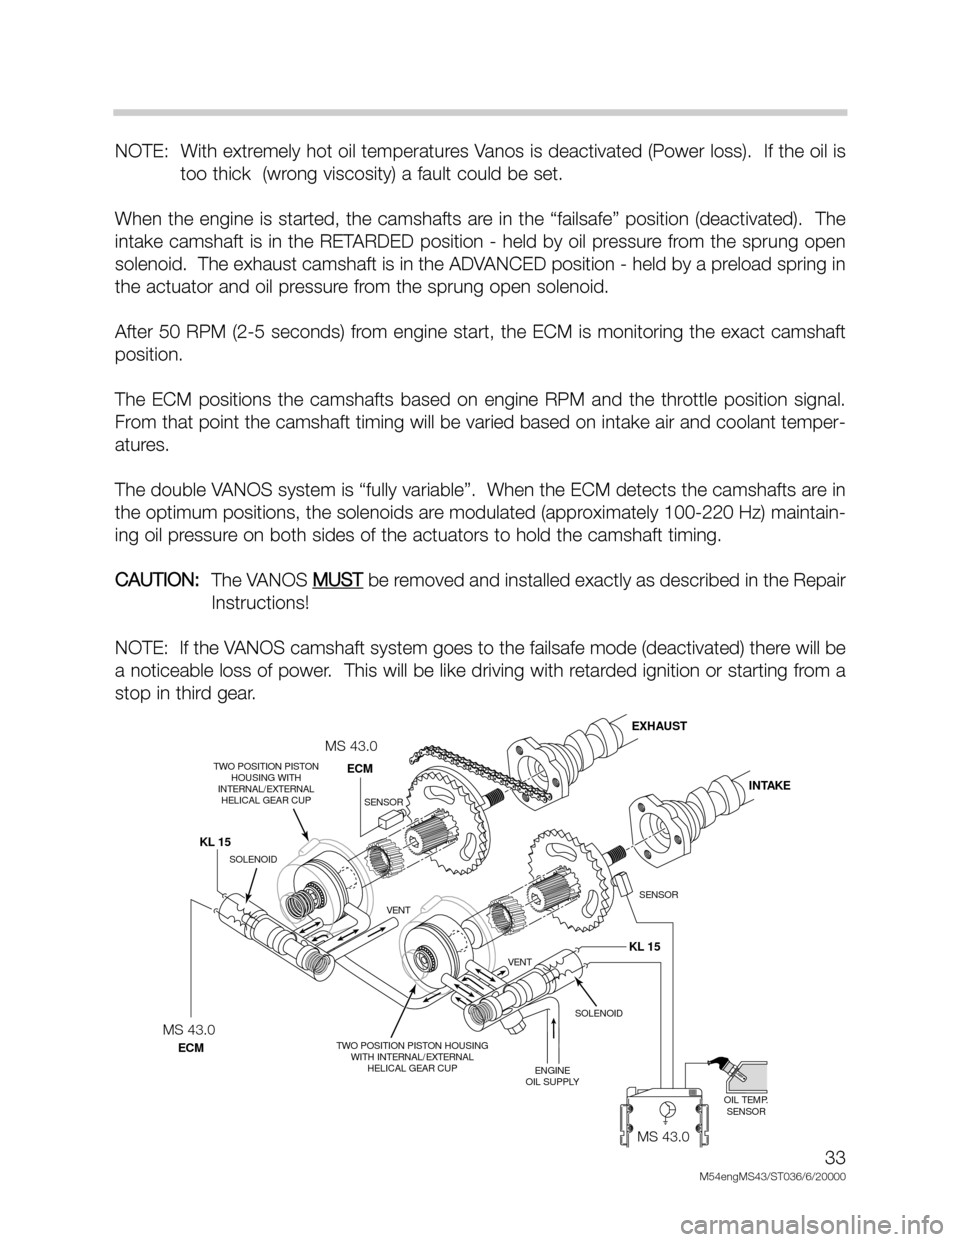 BMW X5 2004 E53 M54 Engine Workshop Manual 33
M54engMS43/ST036/6/20000
NOTE:  With extremely hot oil temperatures Vanos is deactivated (Power loss).  If the oil is
too thick  (wrong viscosity) a fault could be set.
When the engine is started, 